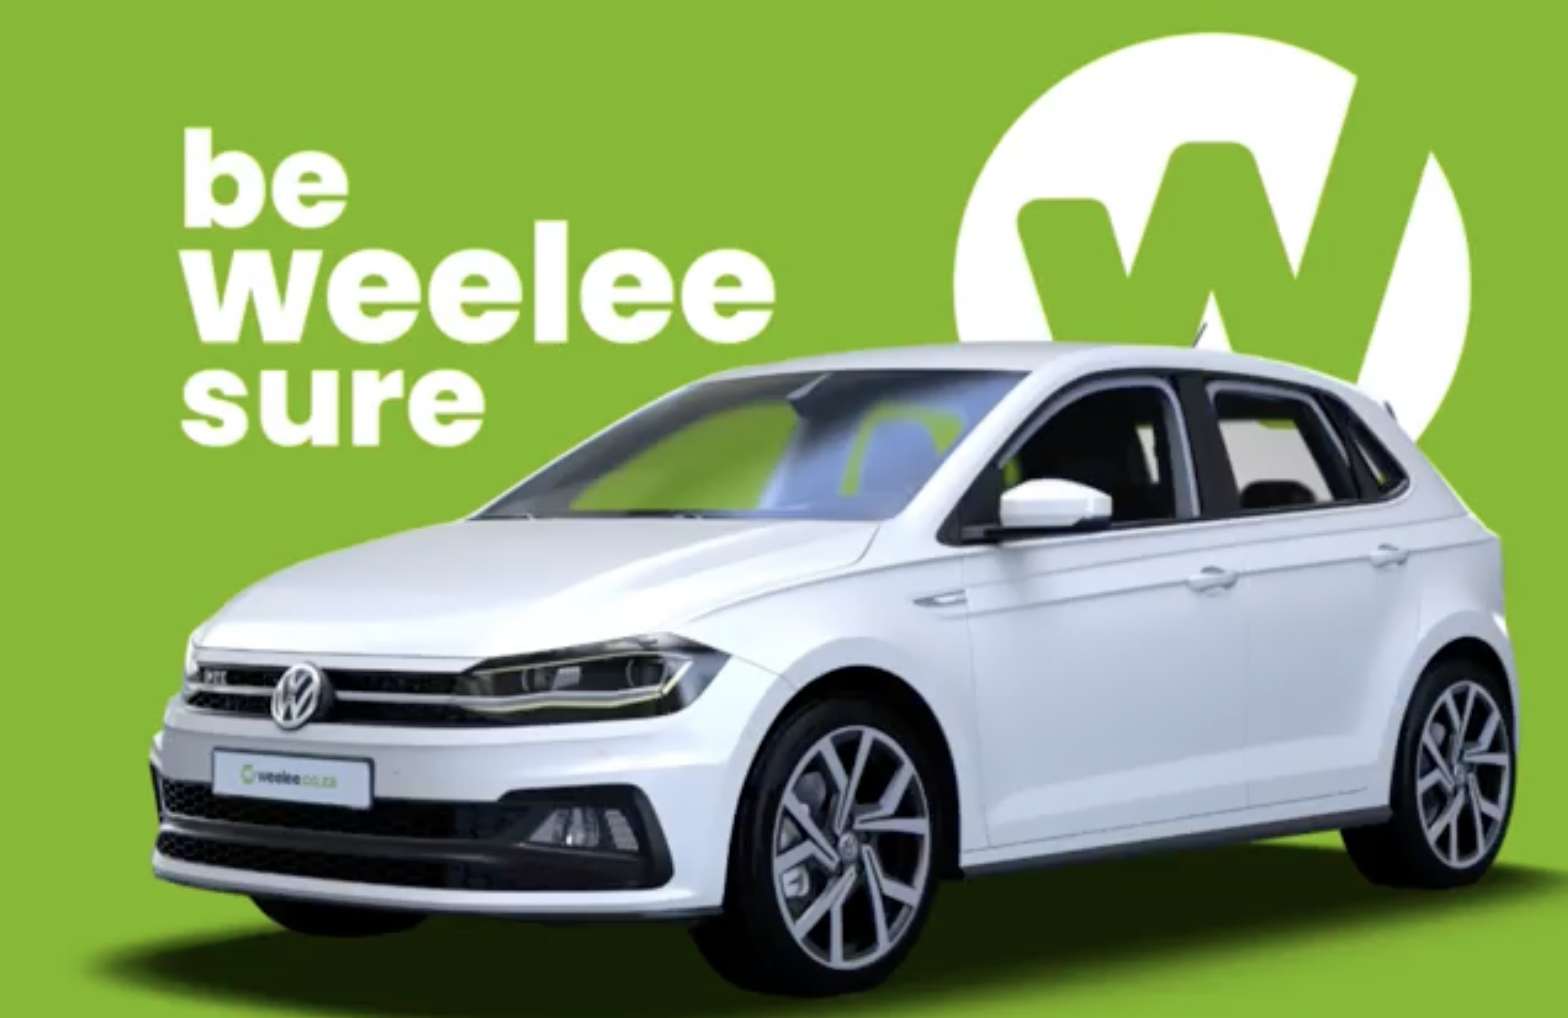 Want to sell your car for more? Be 'Weelee sure'